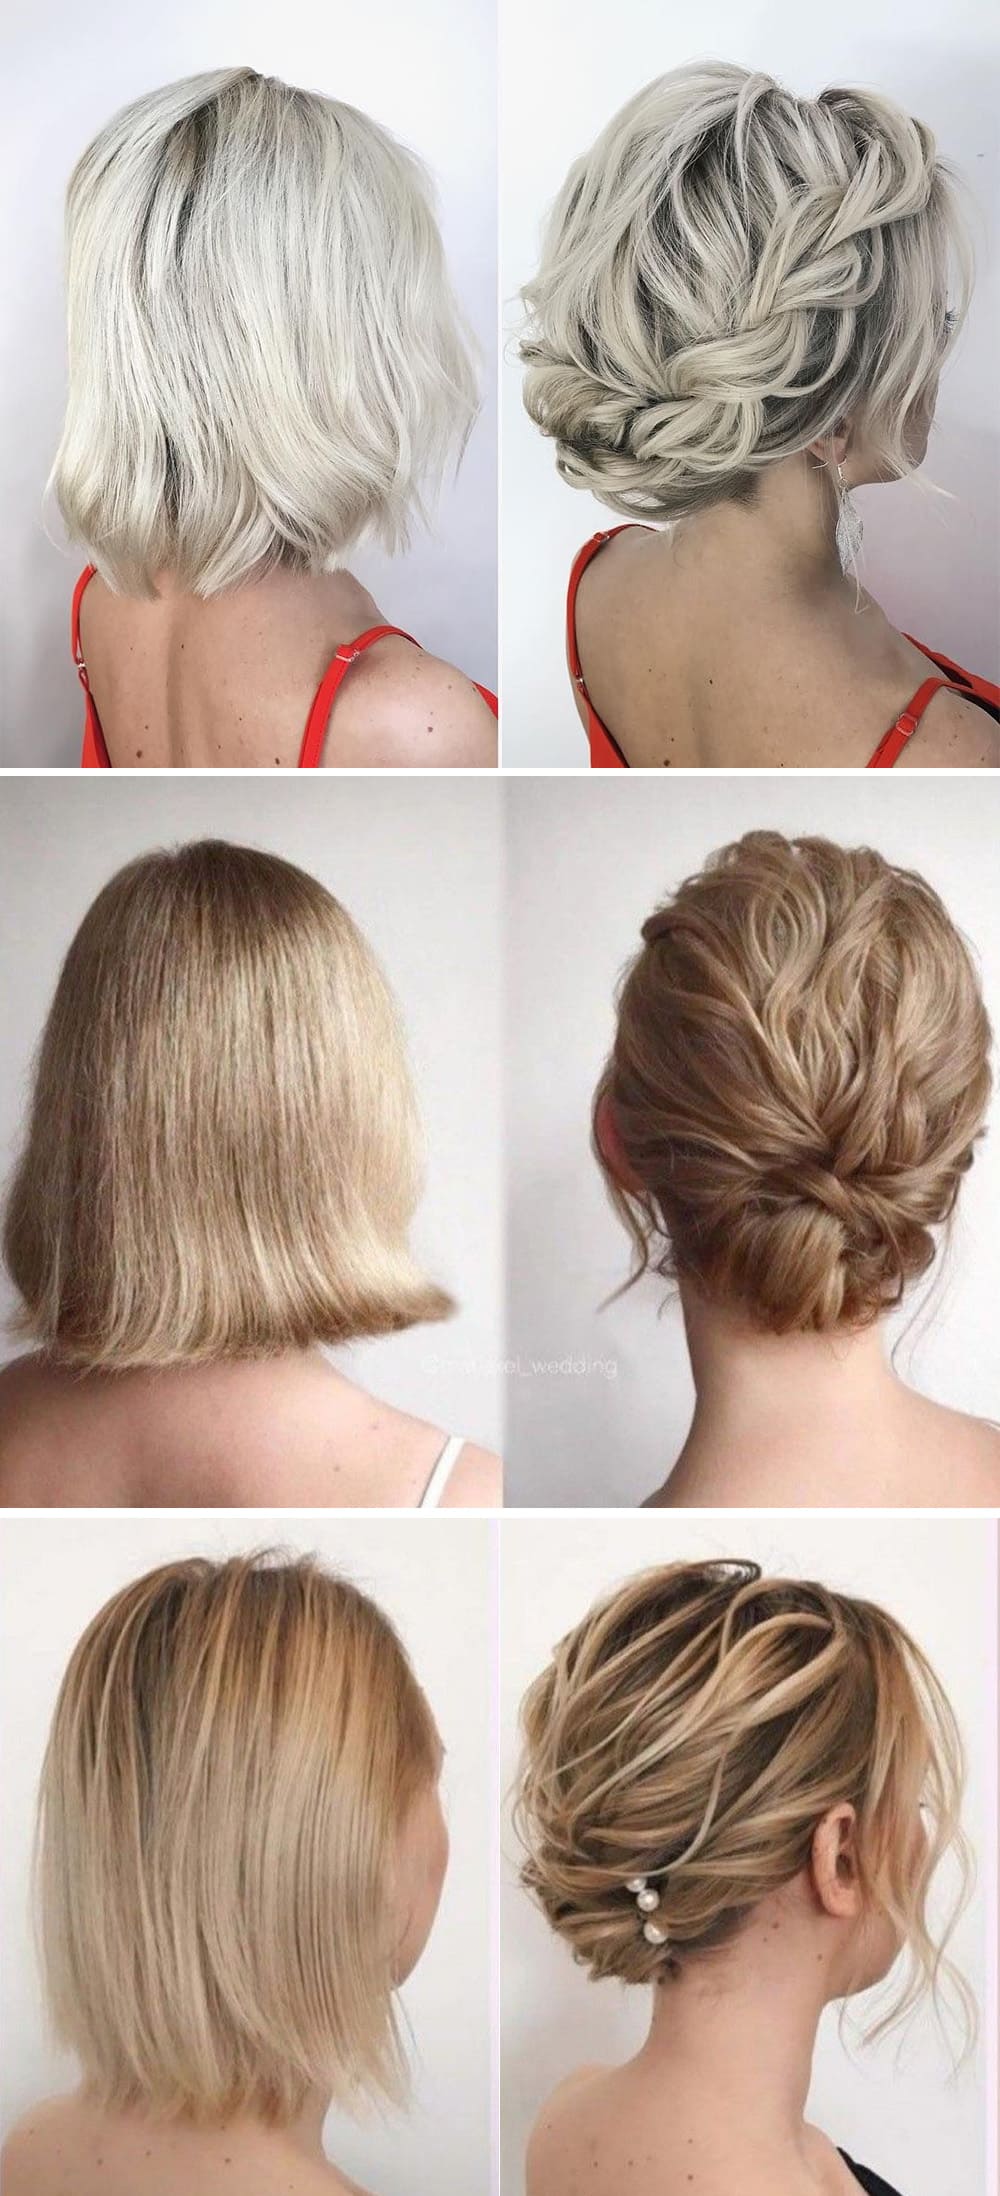 15 Ways to Style Your Lobs (Long bob Hairstyle Ideas) - Pretty Designs